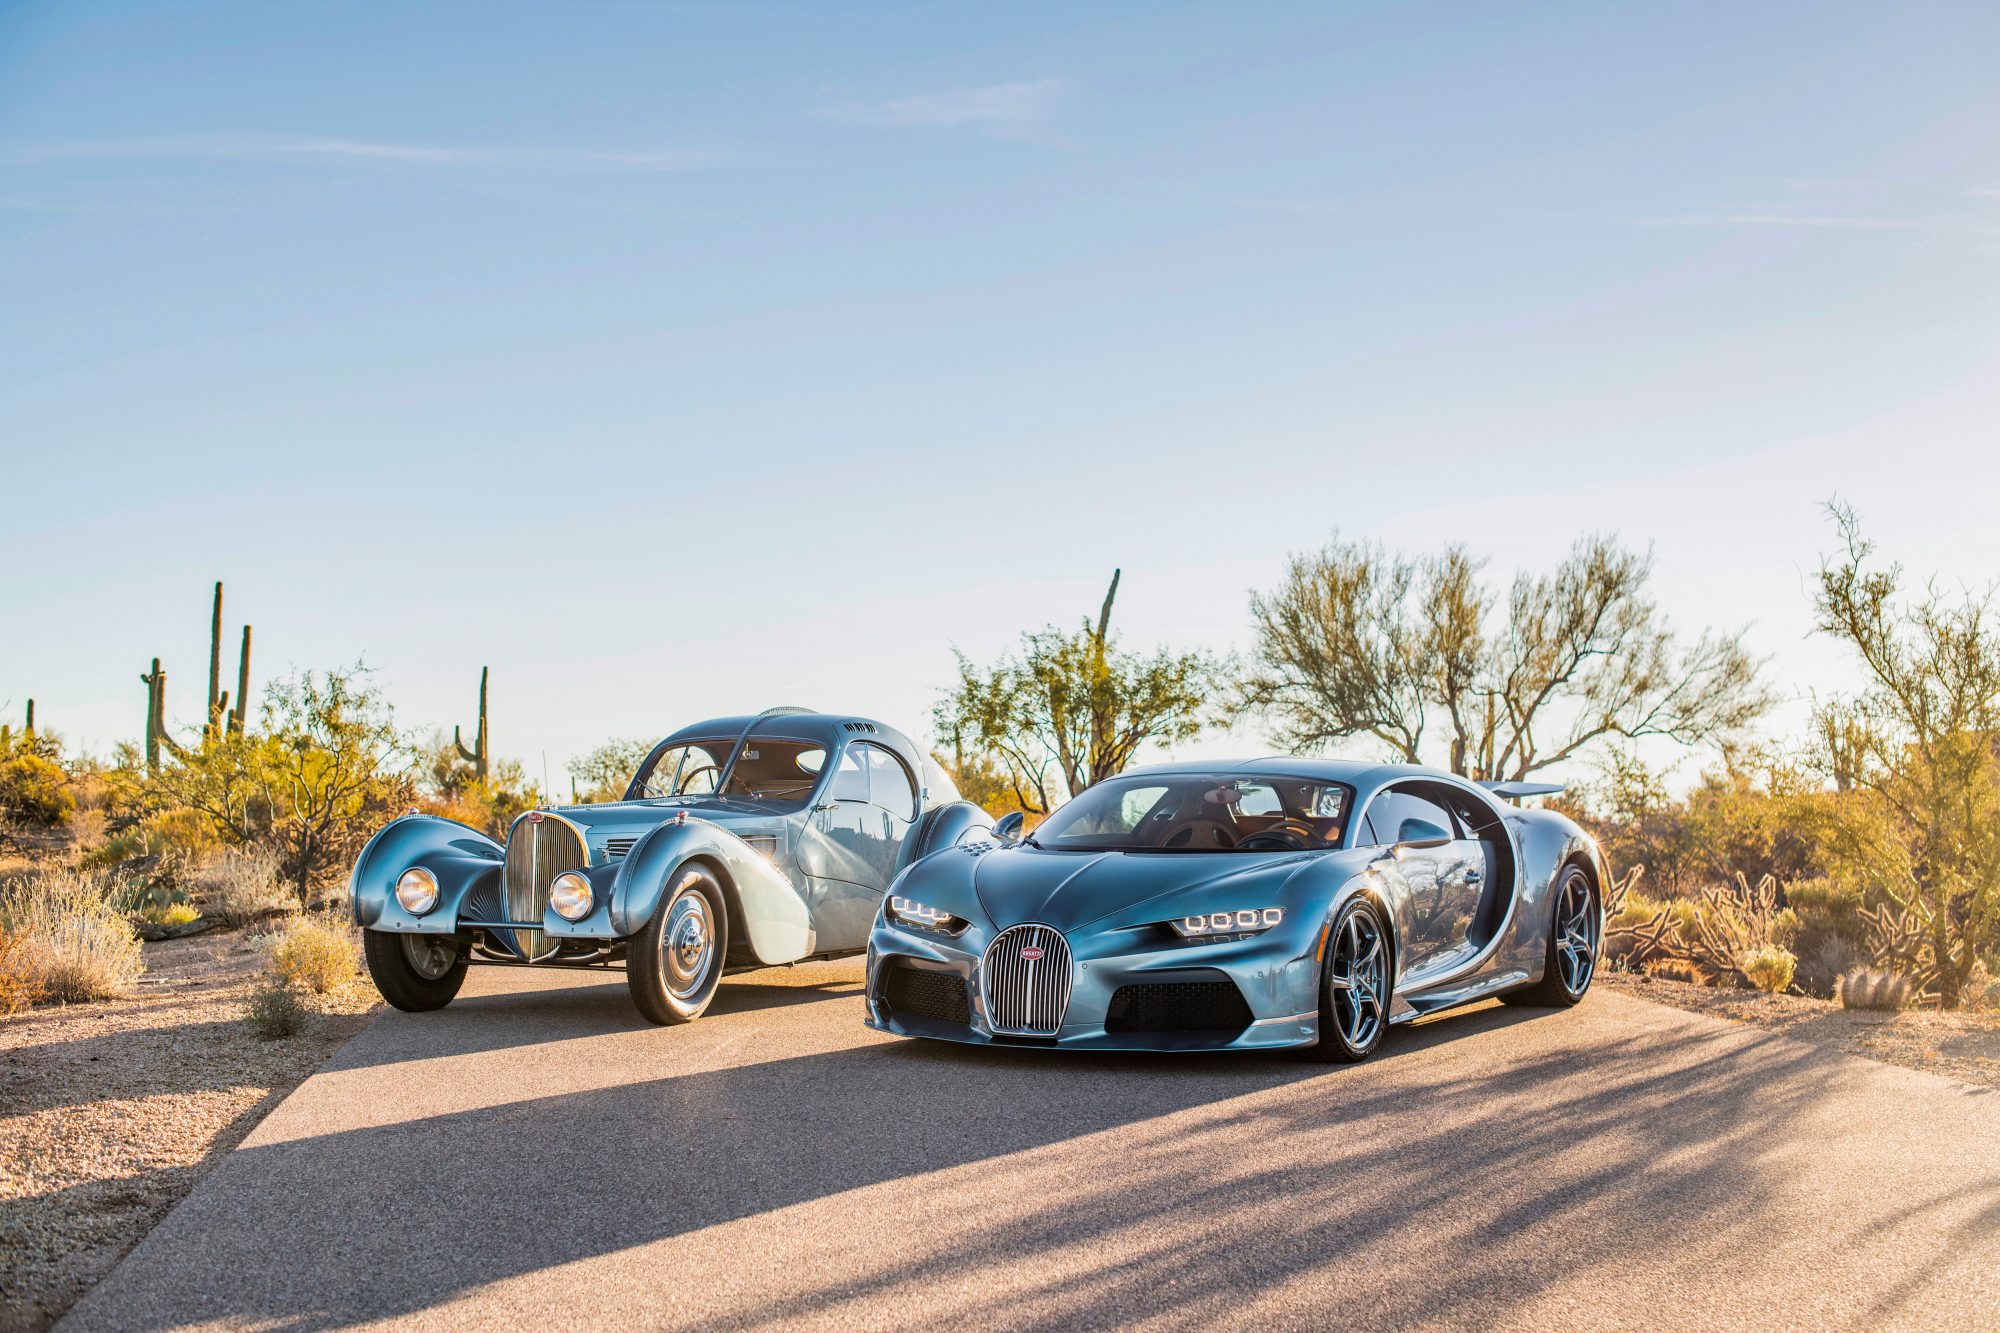 The Bugatti Chiron Super Sport ’57 One of One’ is a homage to an icon